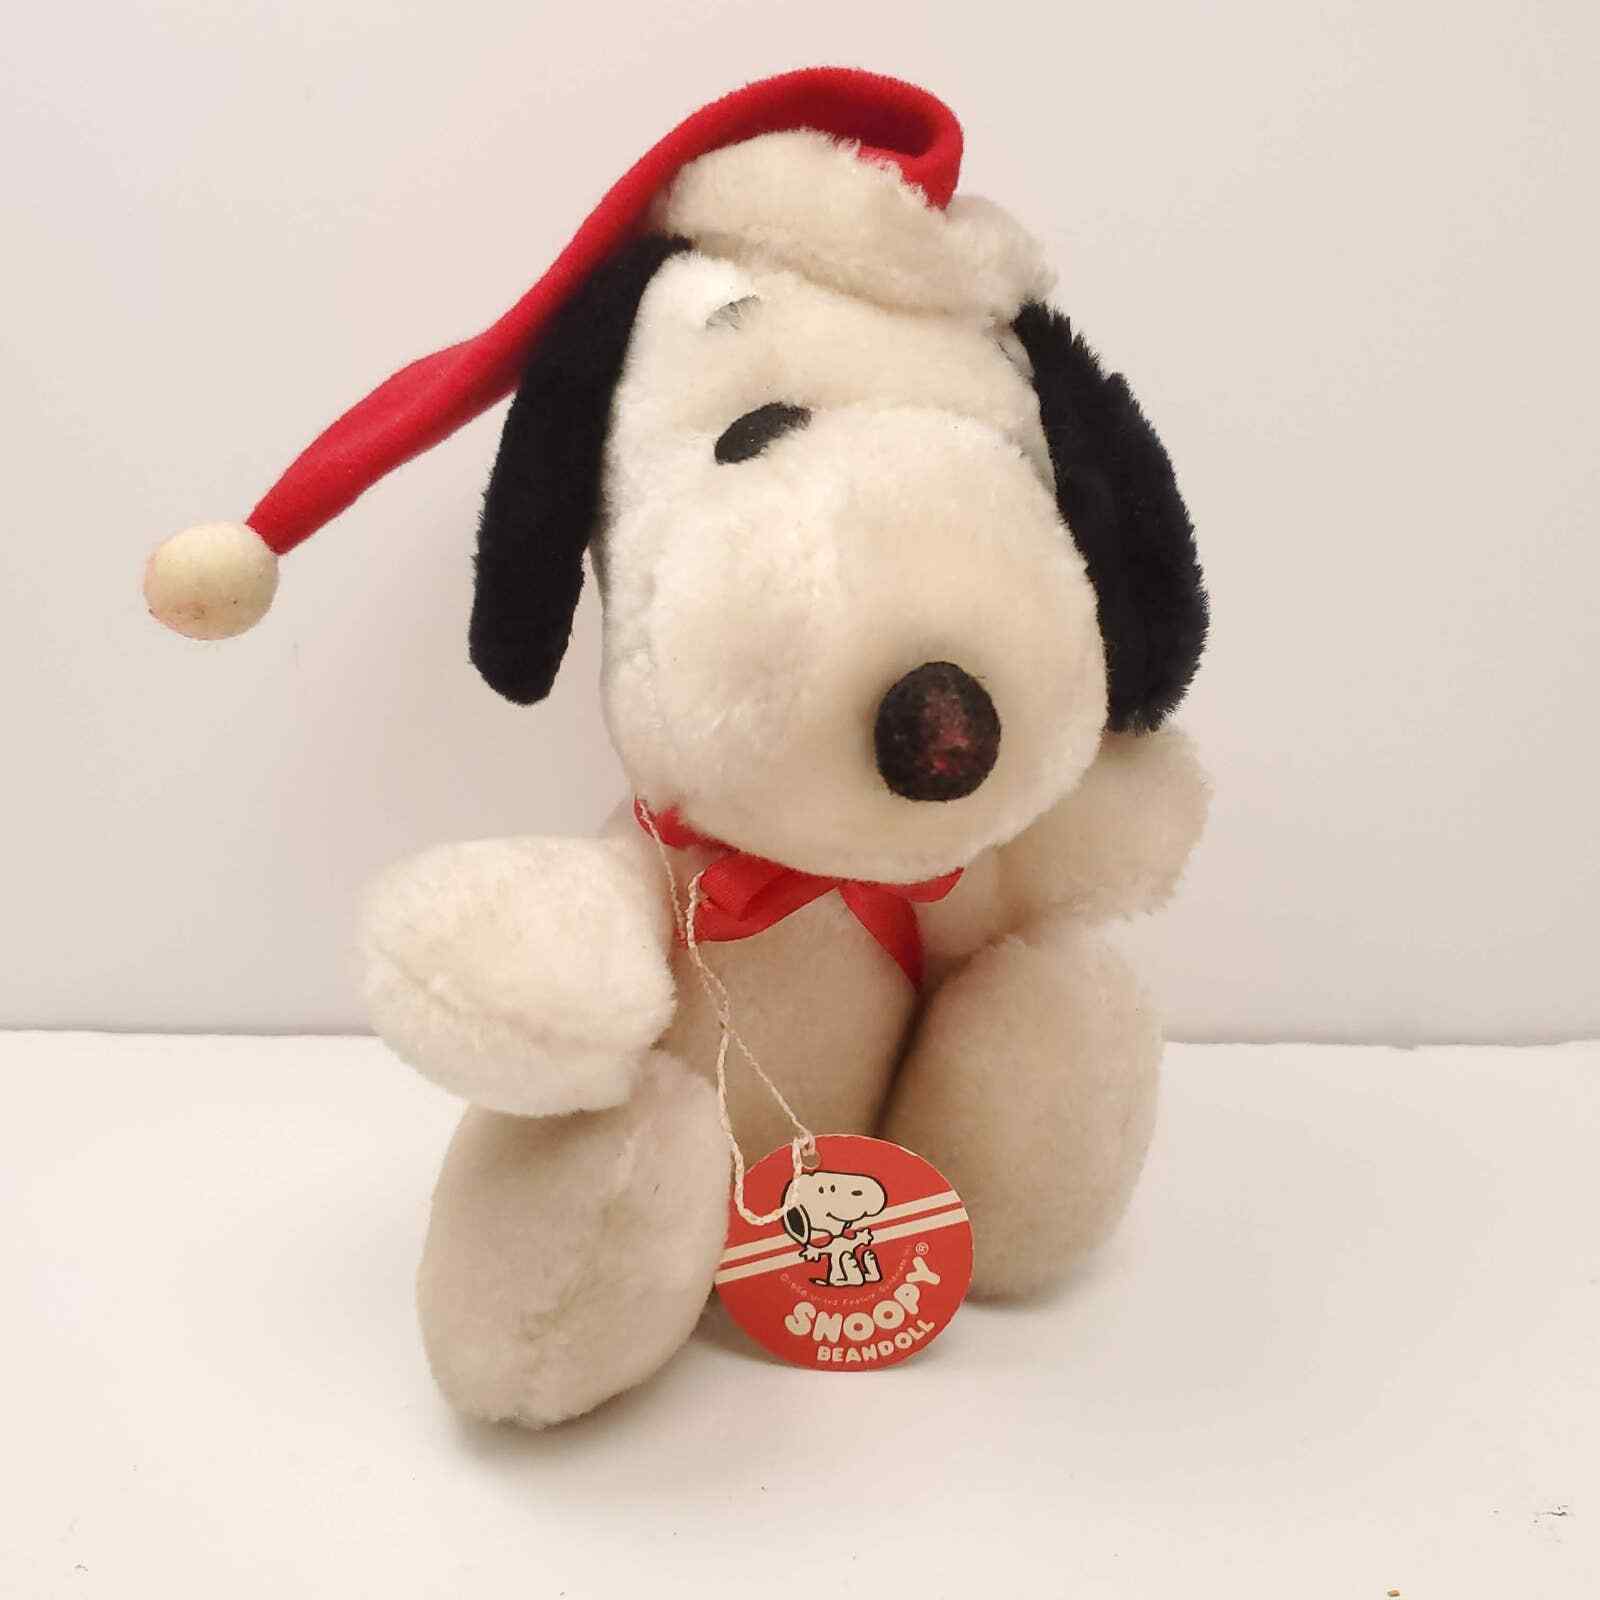 Rare Vintage New Snoopy Christmas Bean Doll Stuffed plush Toy Doll 1968 Holiday